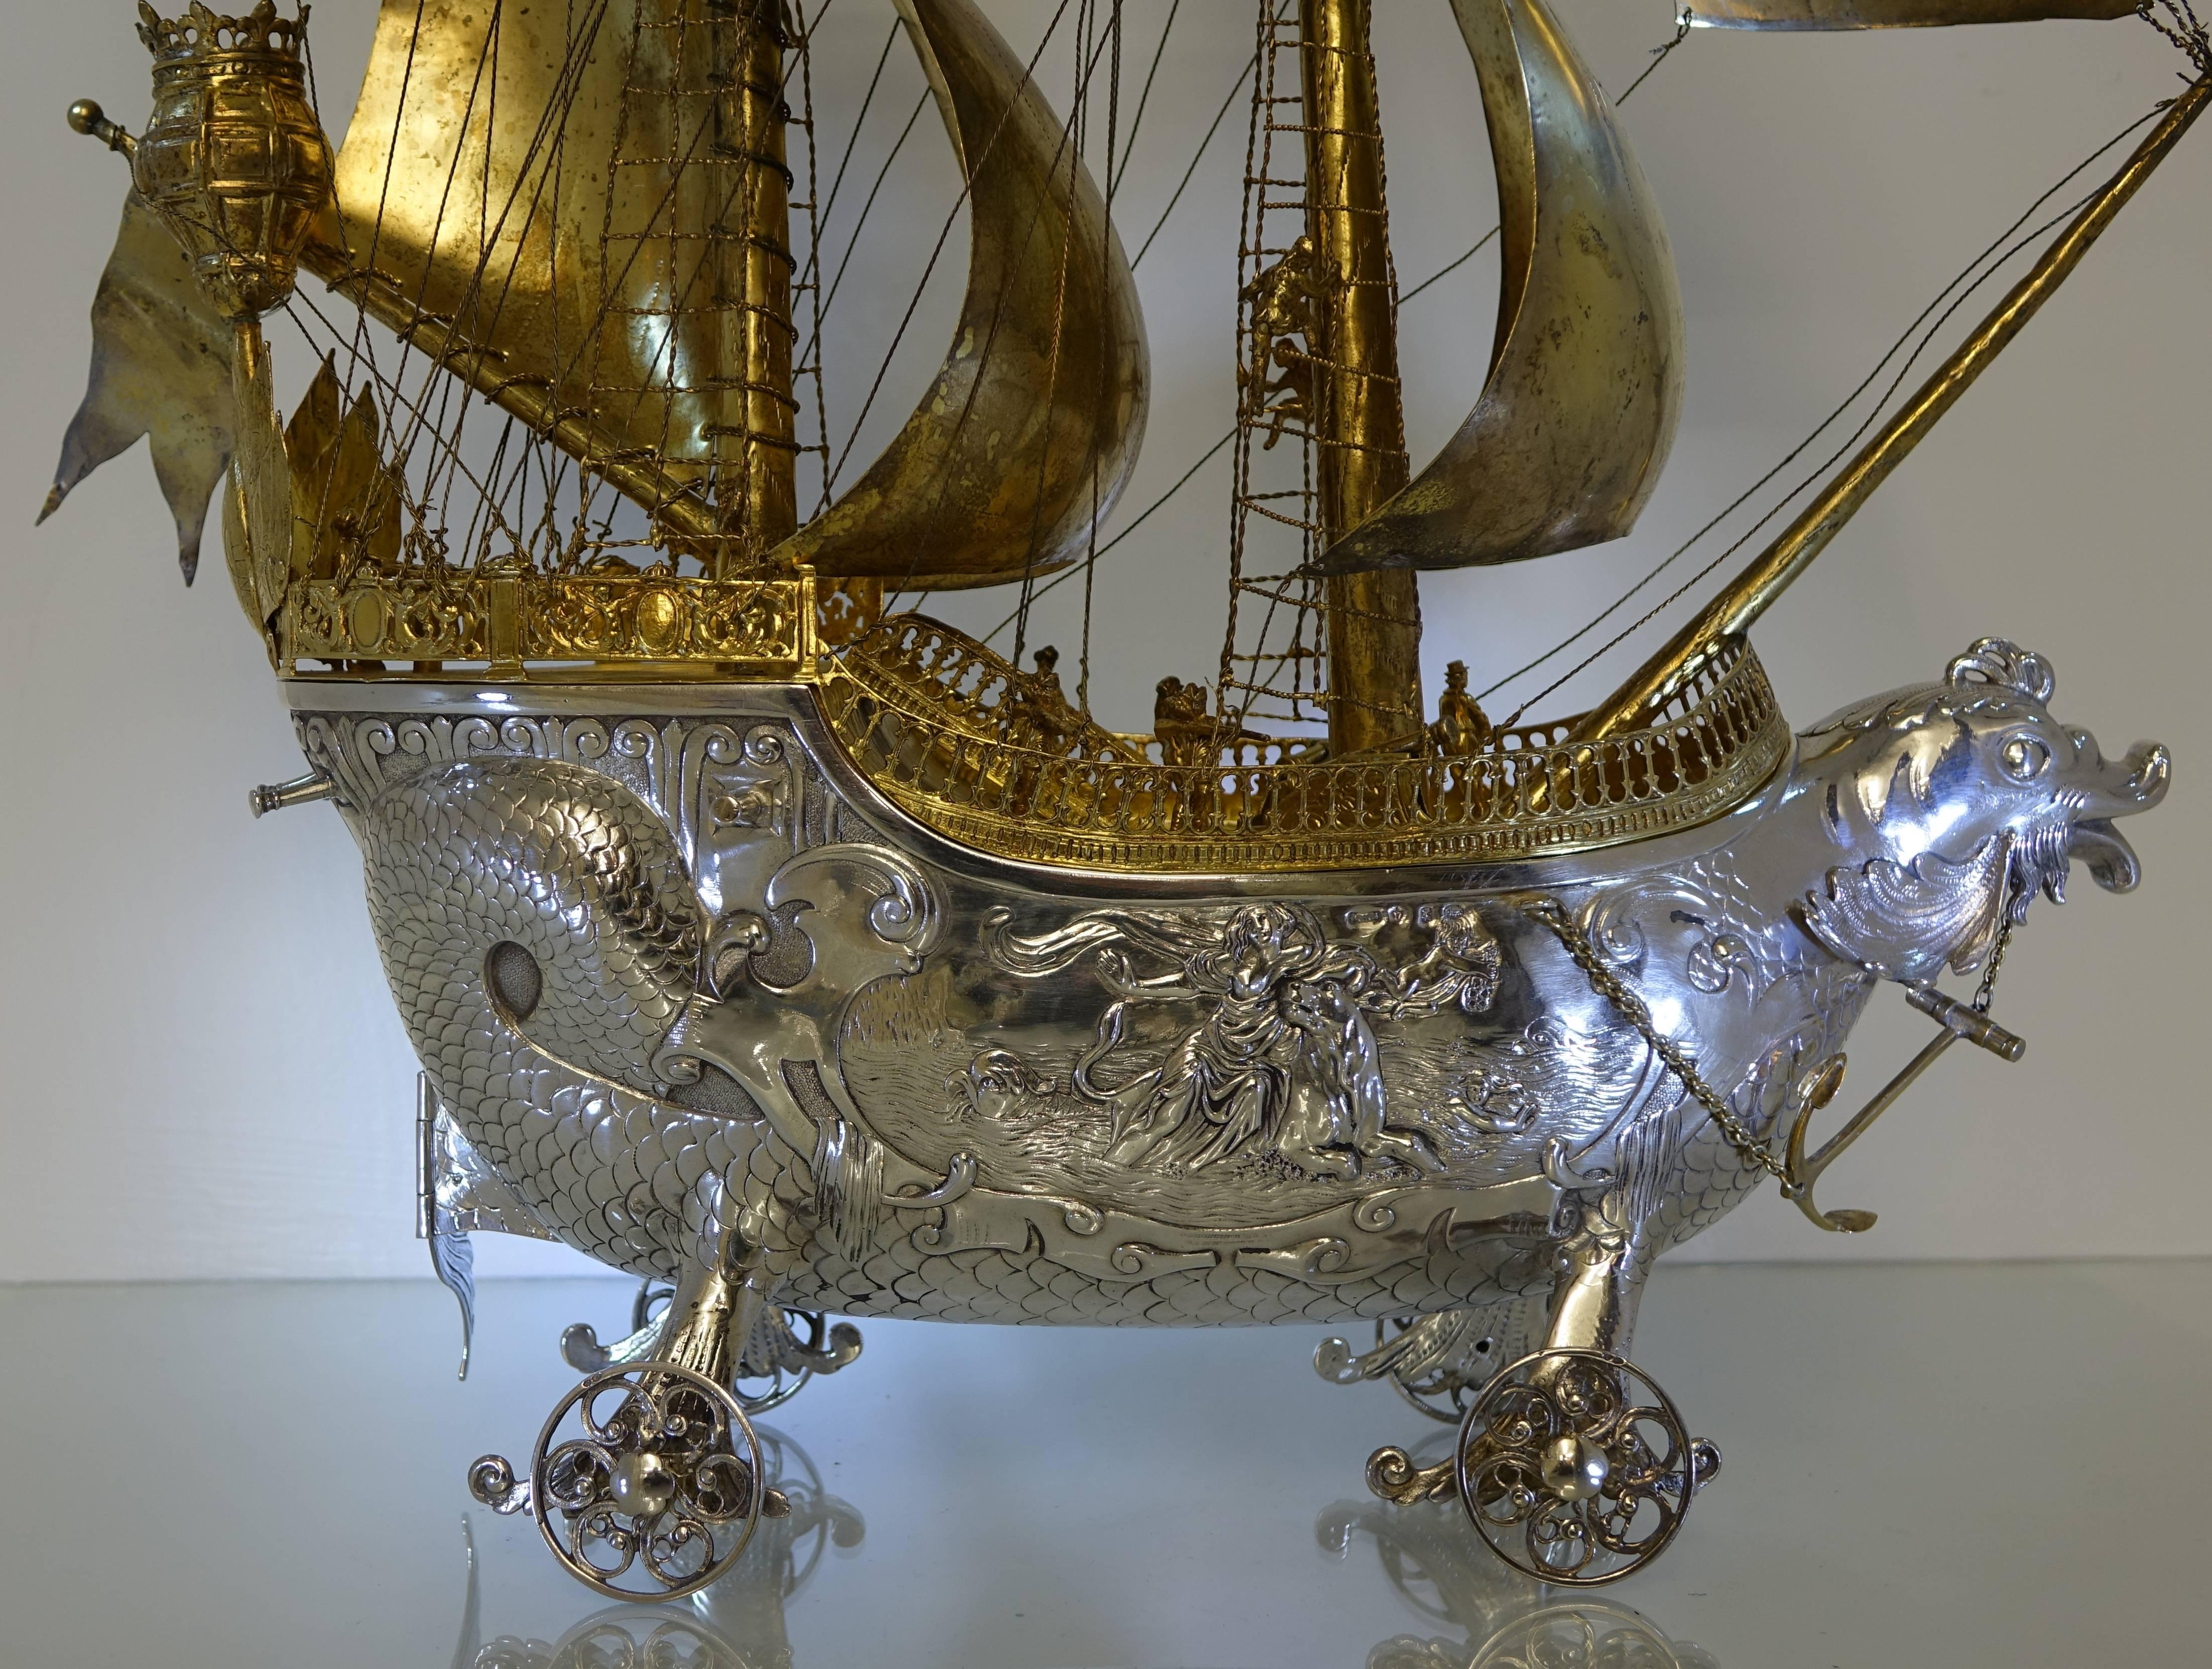 Antique silver Neff/Galleon import marks 1913 Berthold Muller.

A stunningly beautiful large silver Neff/Galleon with ornate hand chasing depicting life at sea. The hull of the Neff has a serpent theme throughout with the bow baring a serpent’s